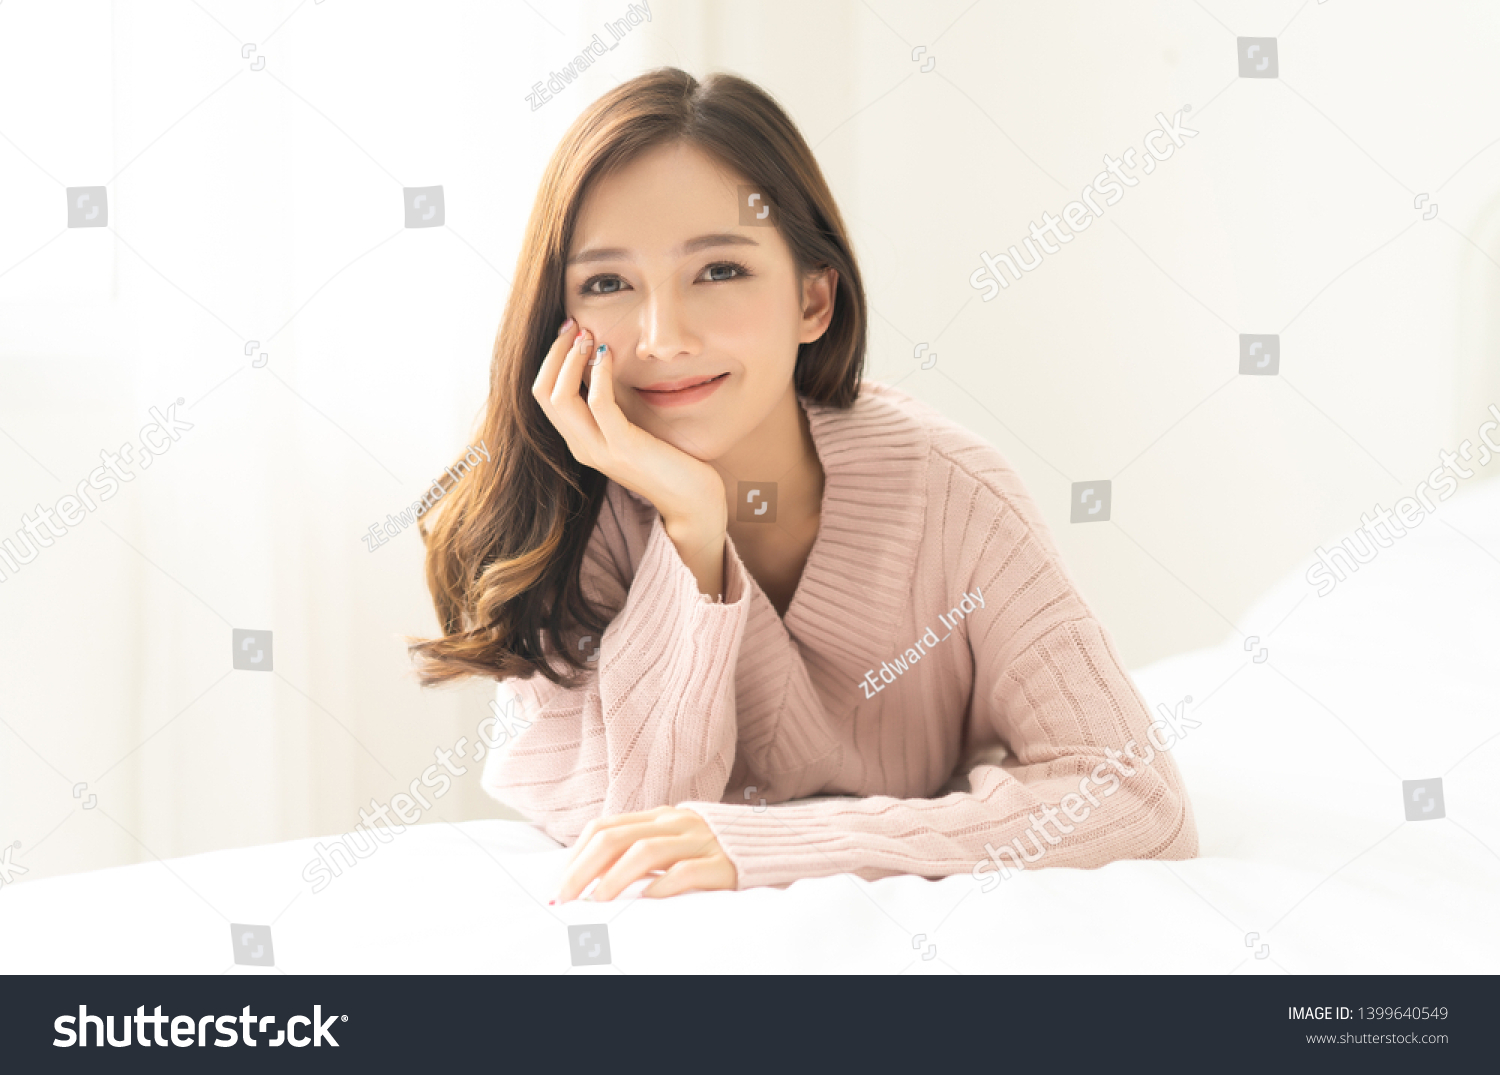 Portrait of young Asian woman smiling friendly and looking at camera in living room.Woman's face closeup. Concept woman lifestyle and winter. Autumn, winter season. #1399640549